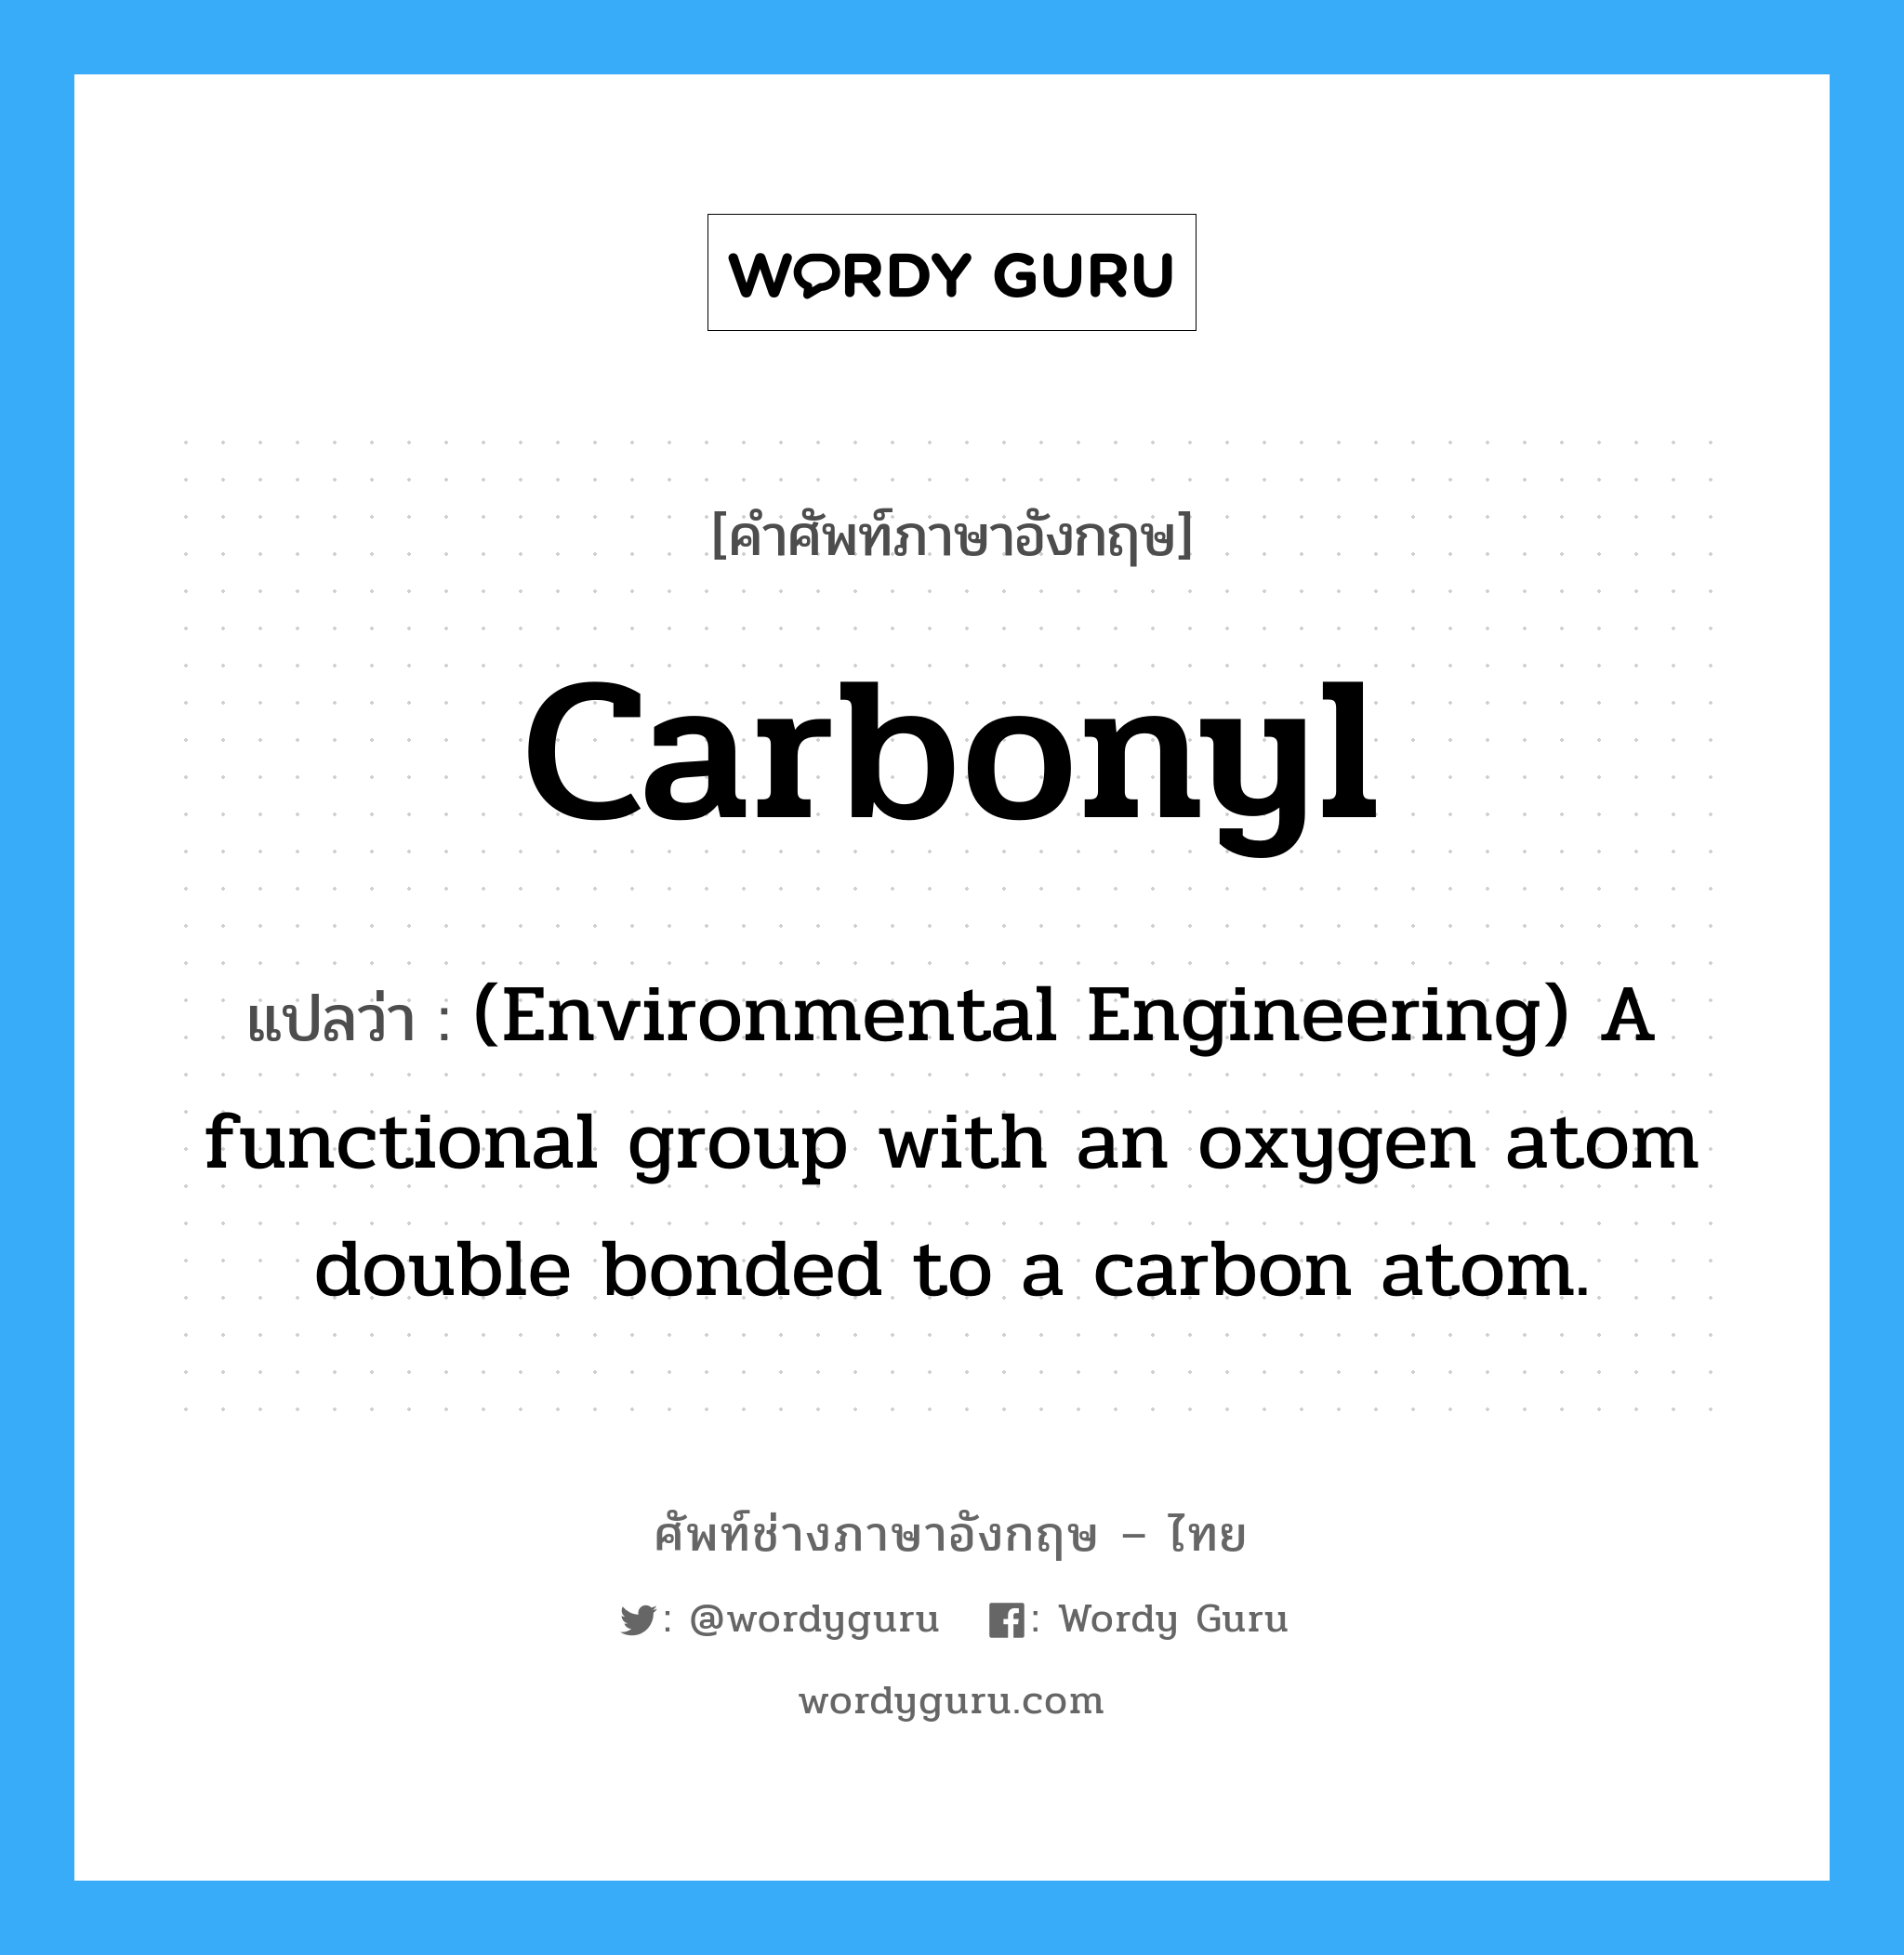 Carbonyl แปลว่า?, คำศัพท์ช่างภาษาอังกฤษ - ไทย Carbonyl คำศัพท์ภาษาอังกฤษ Carbonyl แปลว่า (Environmental Engineering) A functional group with an oxygen atom double bonded to a carbon atom.